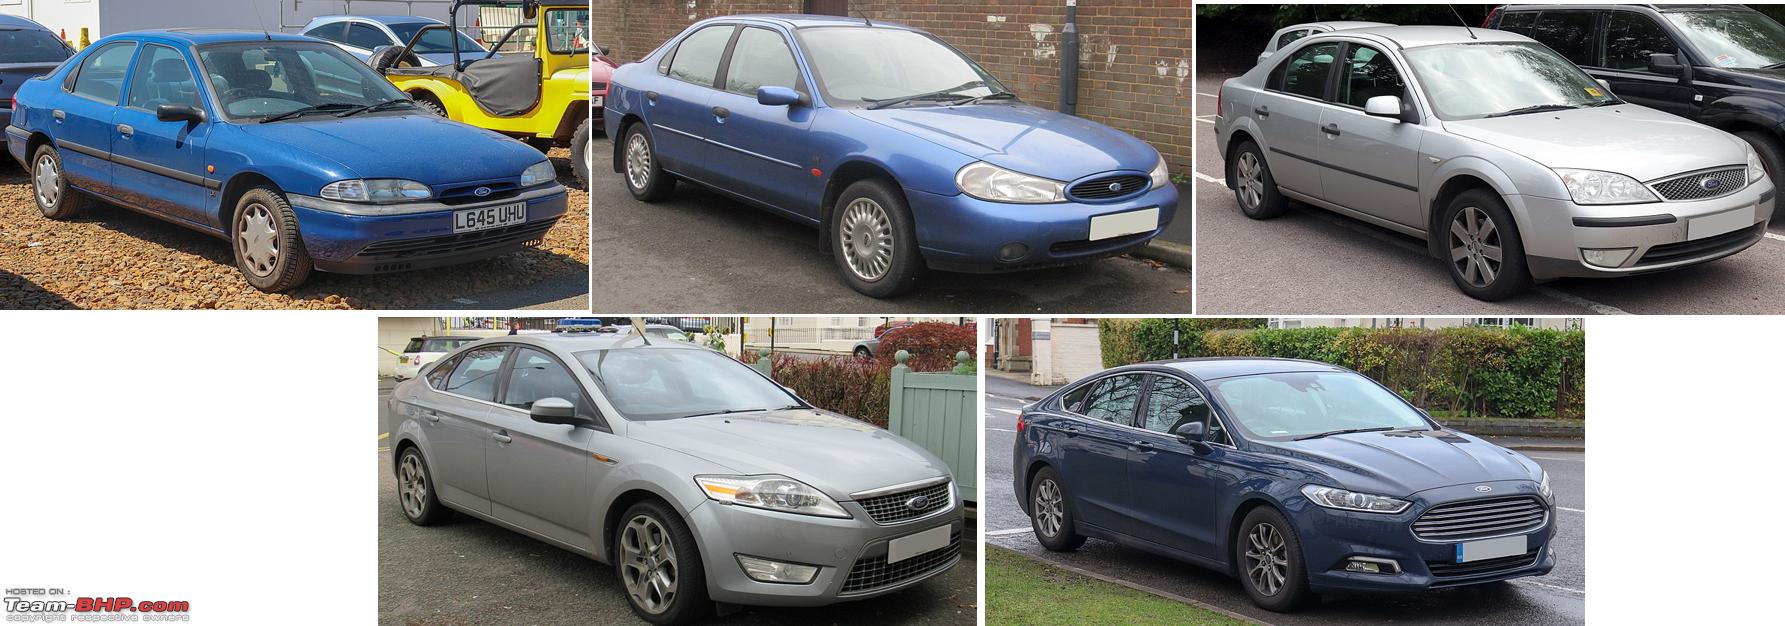 Ford Mondeo Officially Being Retired, Production Ends March 2022